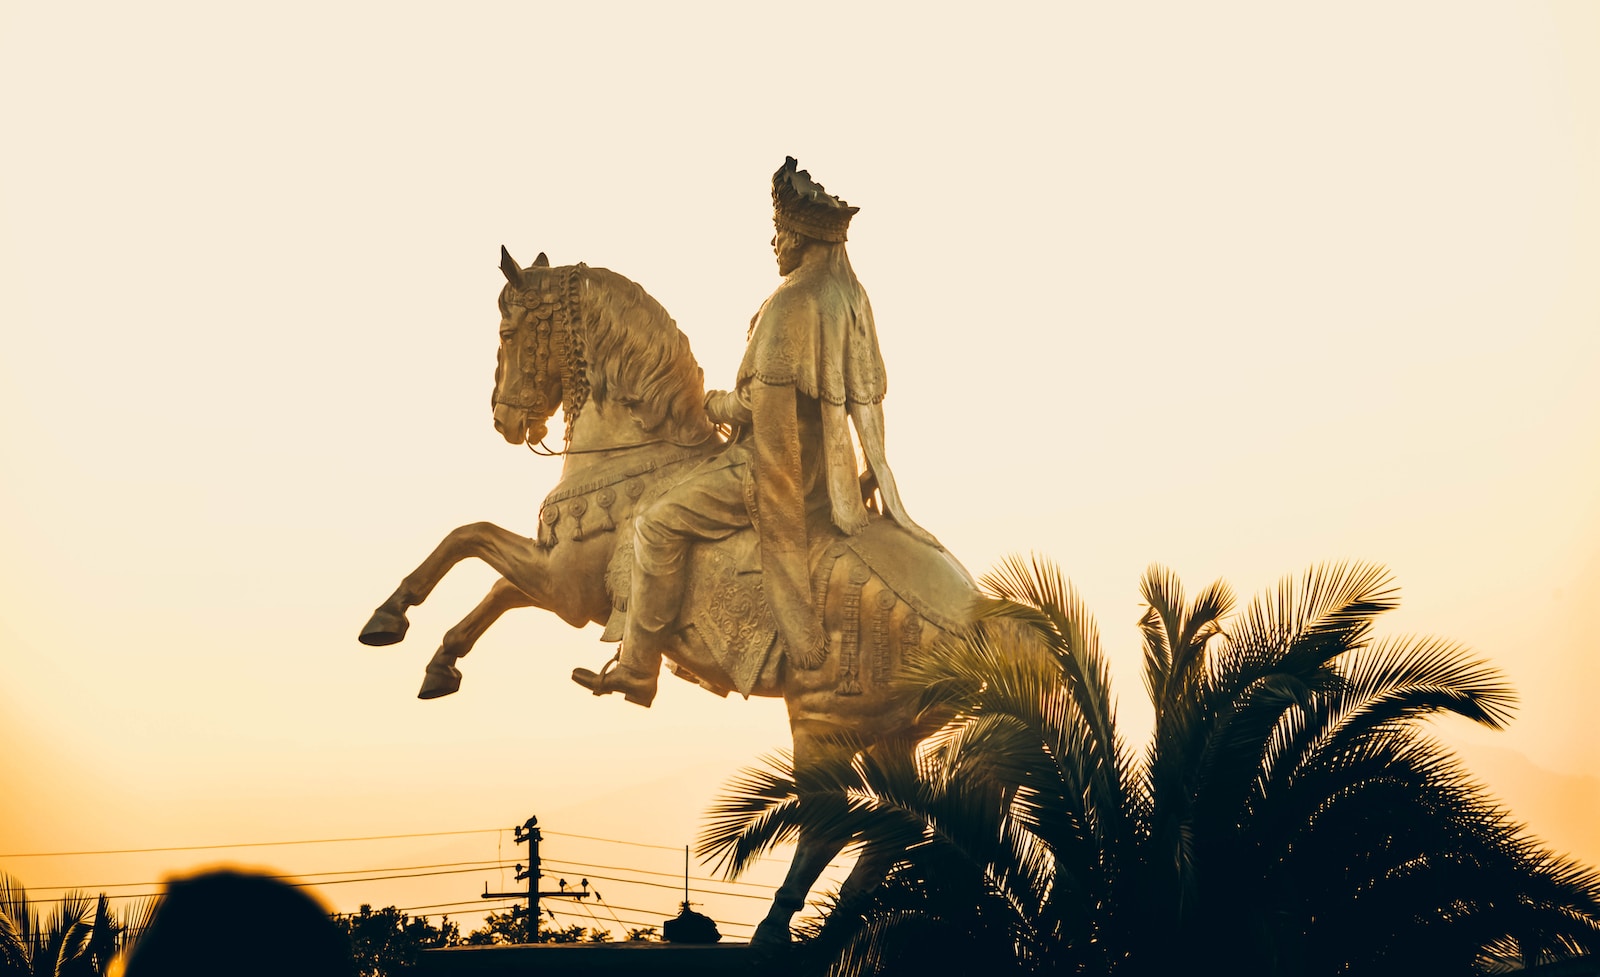 🗽 What Famous Landmark Should You Visit Next Based on Your A-Z Travel Bucket List? Statue of Menelik II in Addis Ababa, Ethiopia